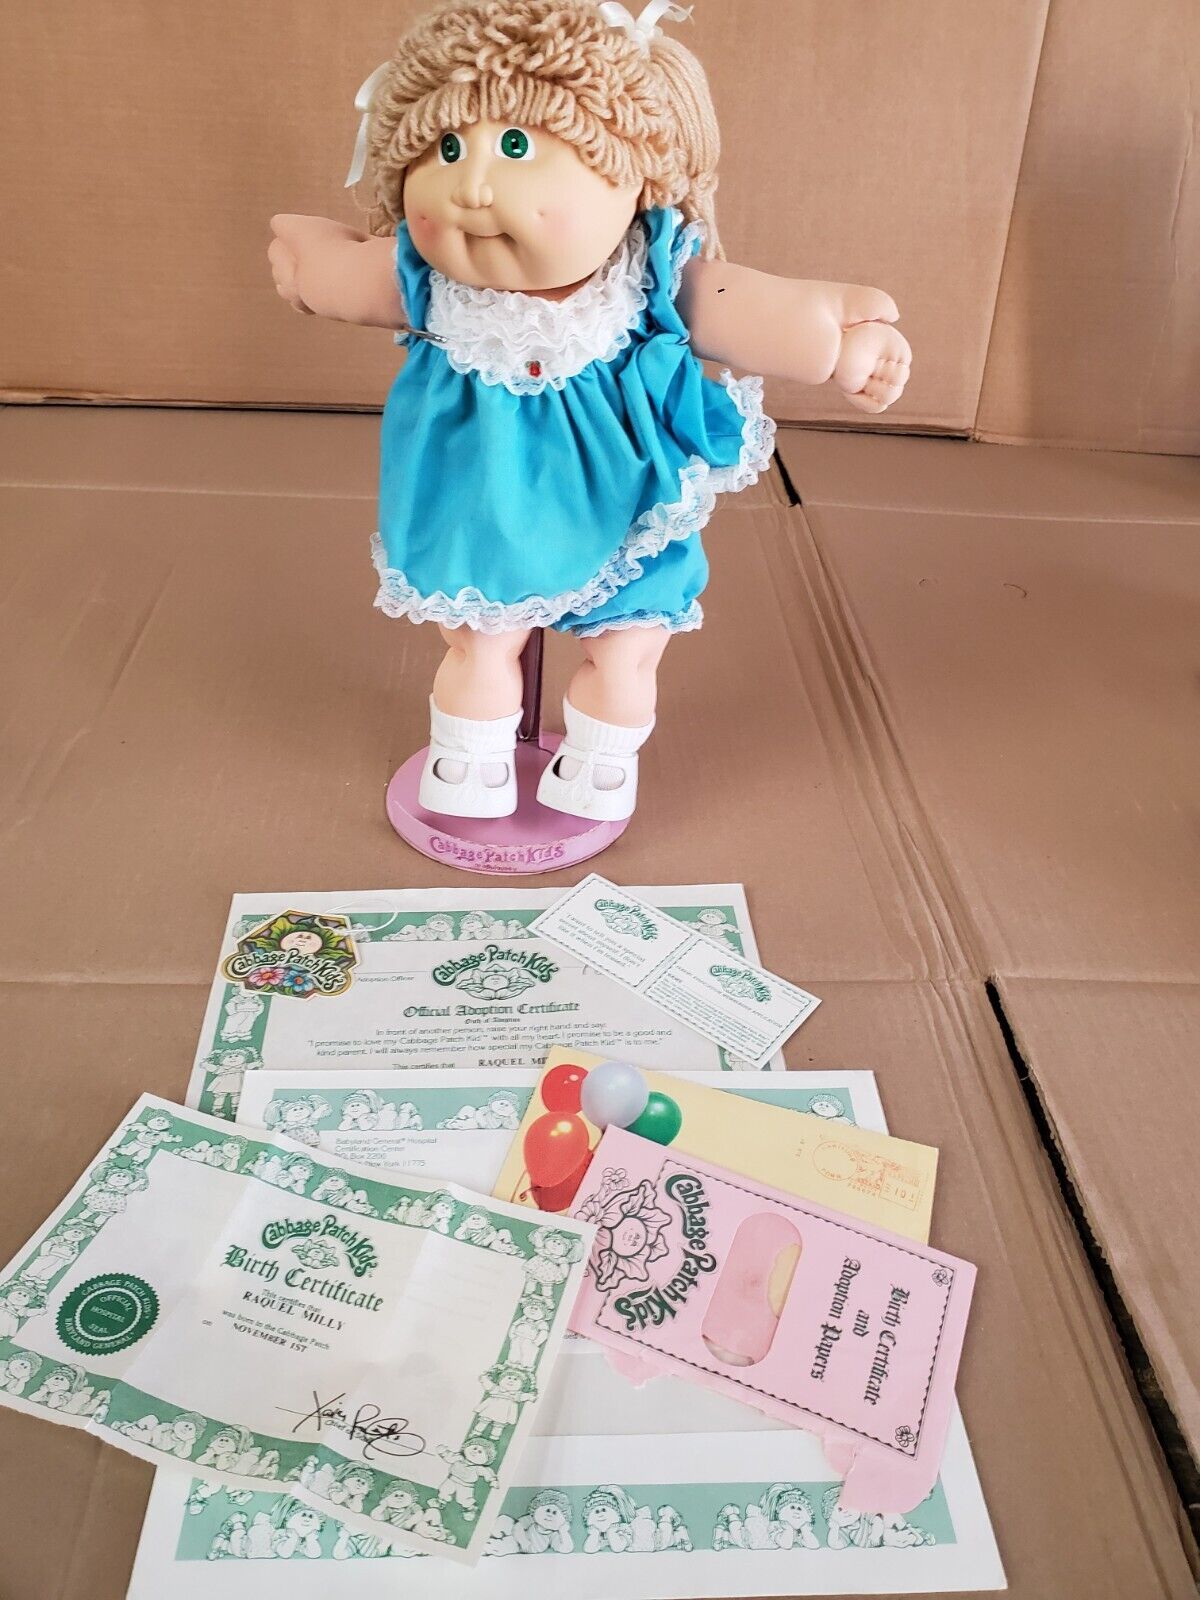 1985 Coleco Cabbage Patch Kids Blonde green eyes head mold 2 blue dress - $92.22